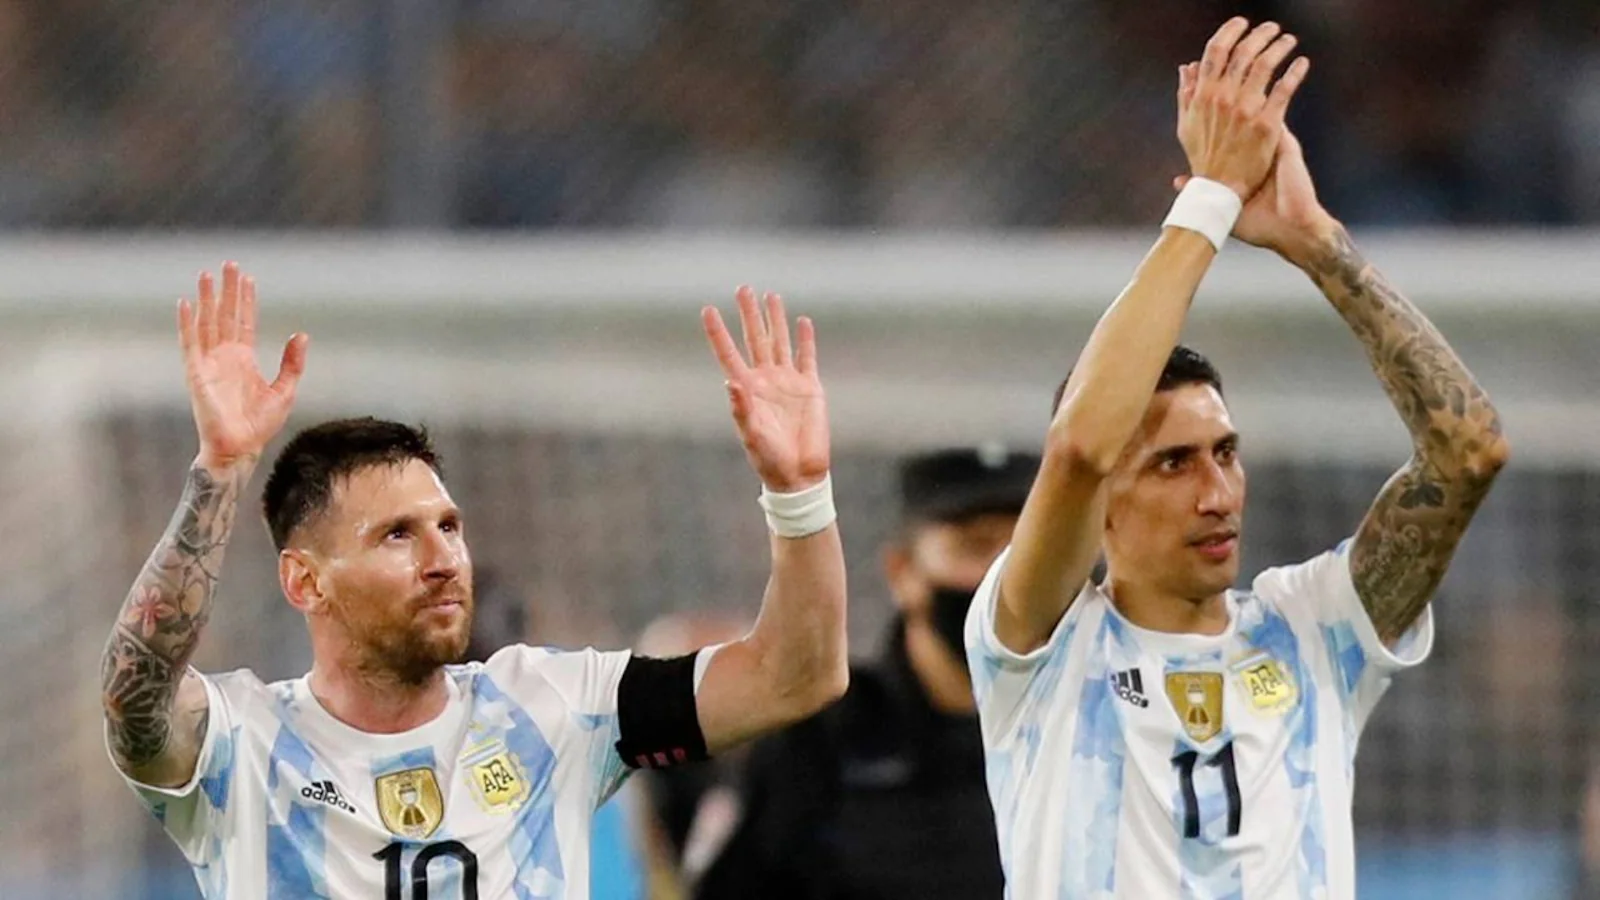 Di Maria Suggested Matthäus Should Cry Elsewhere For Criticizing Messi